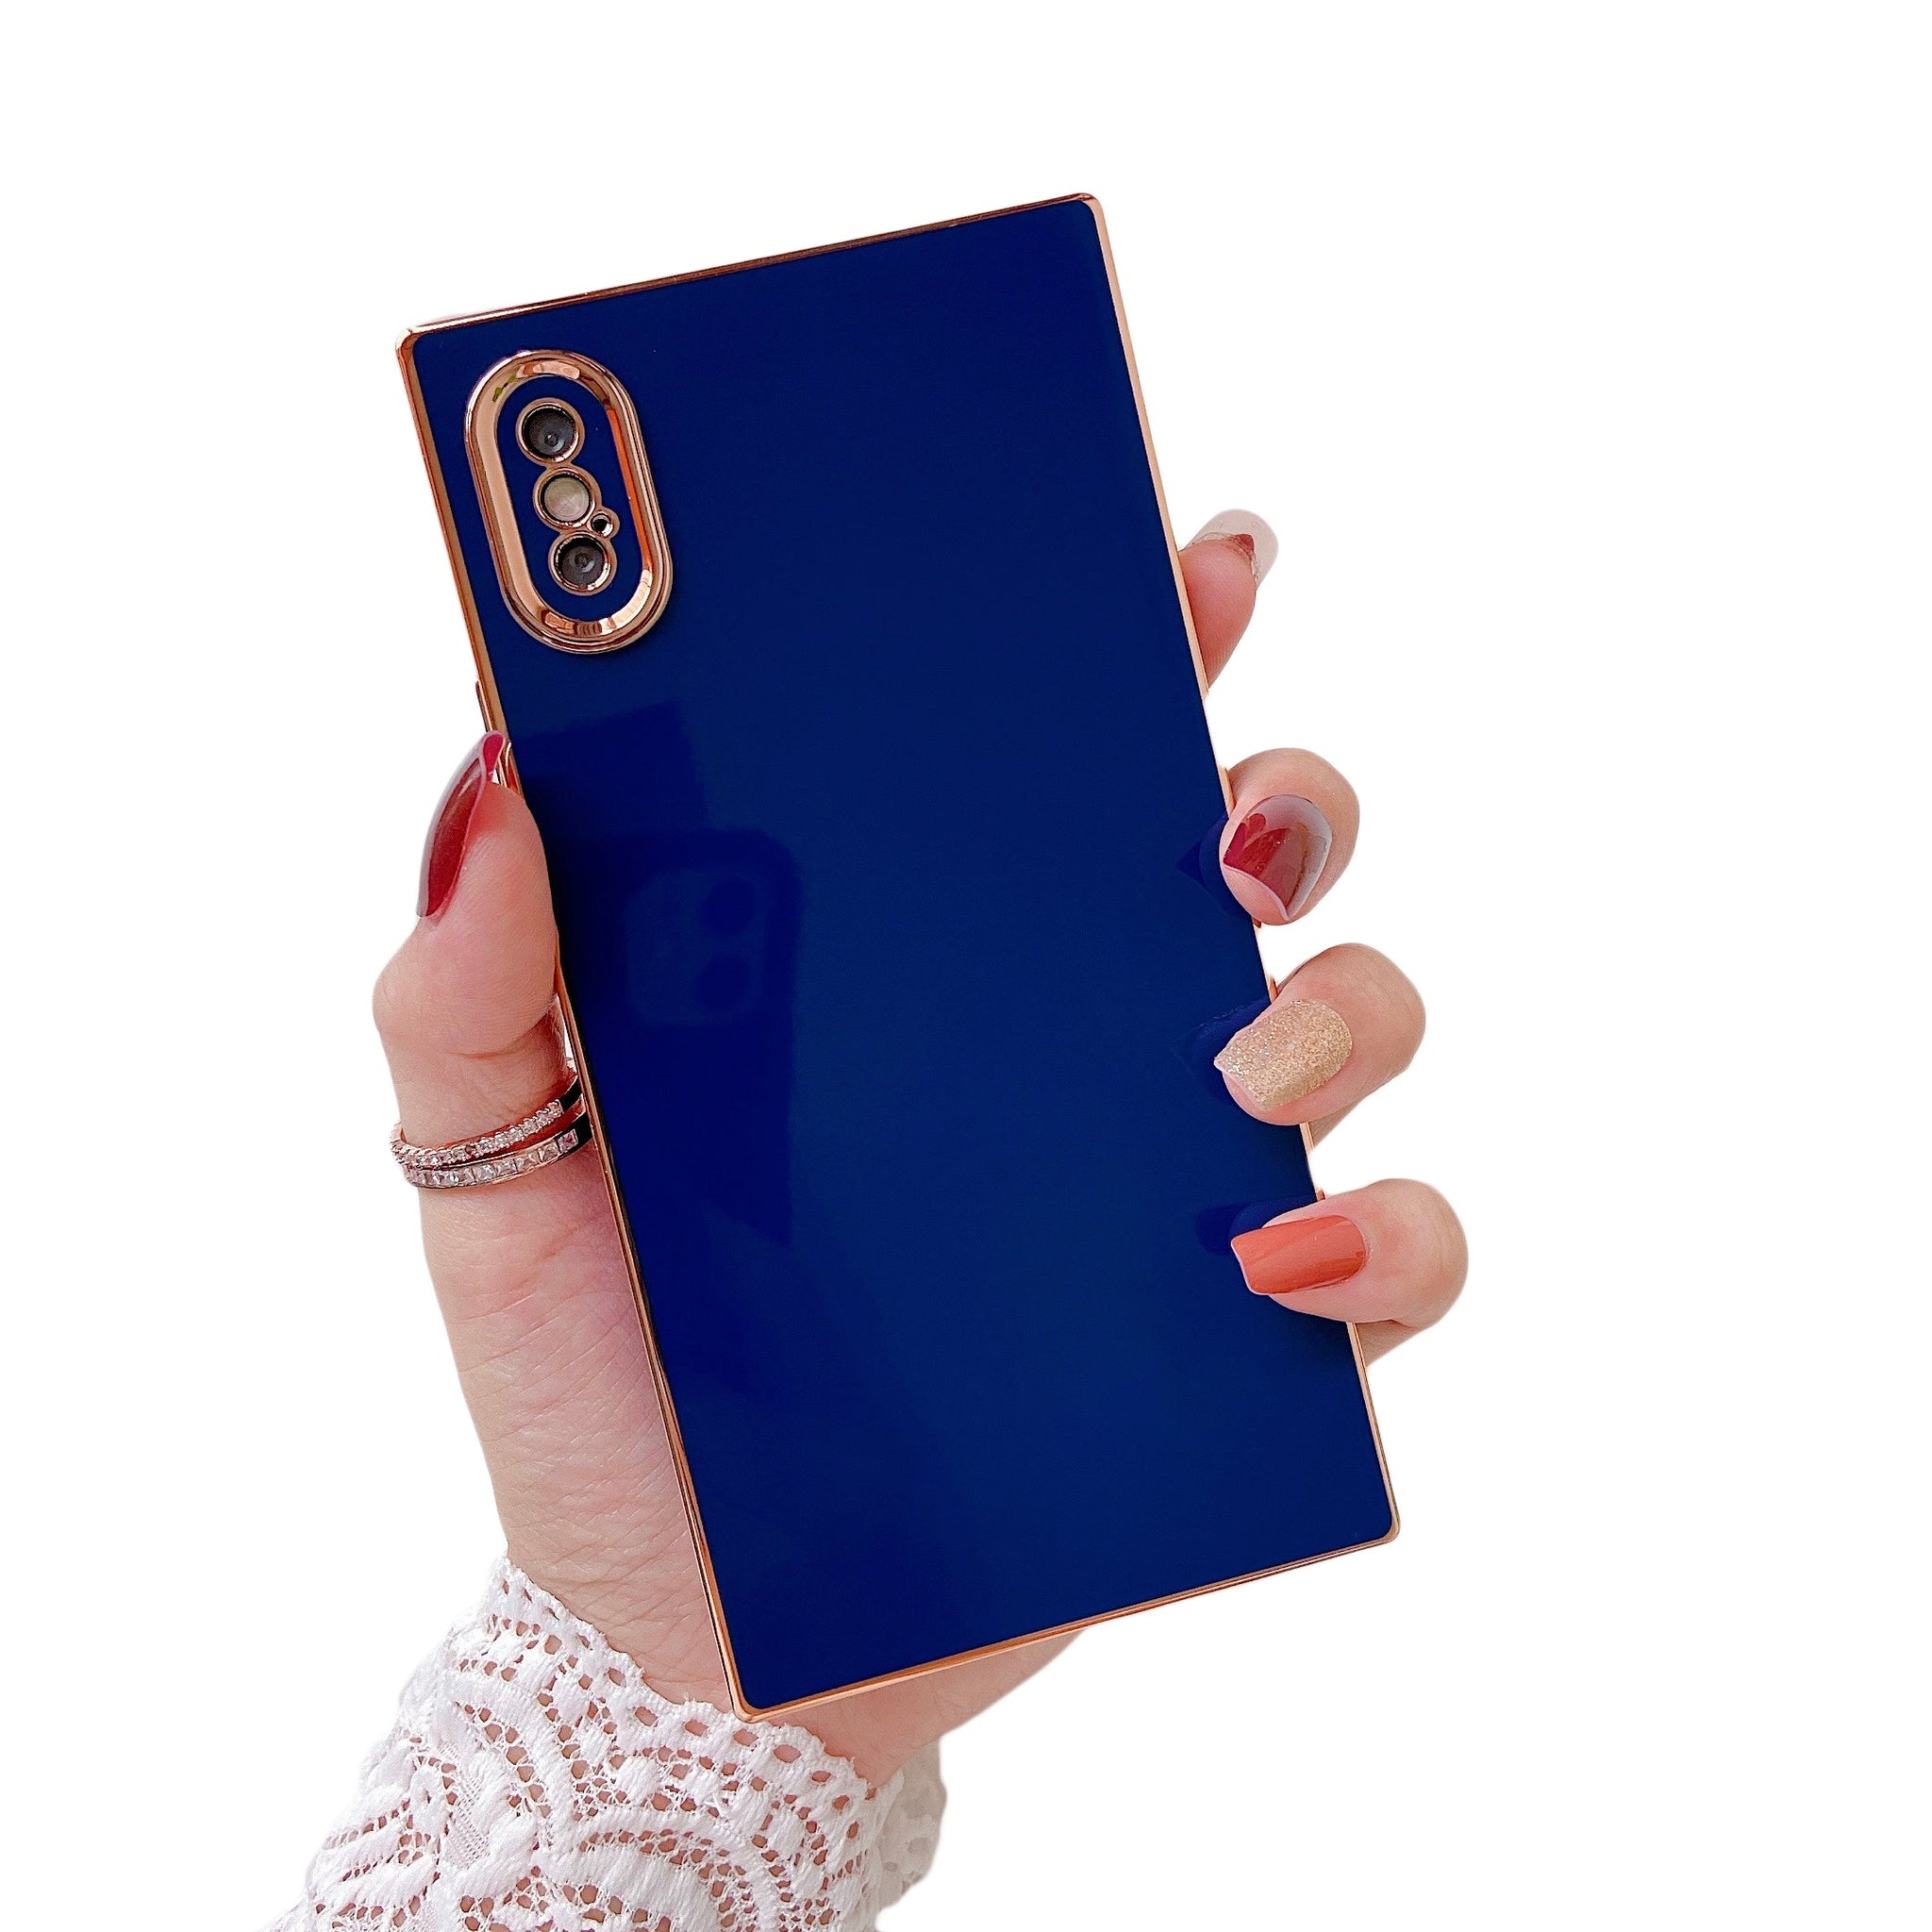 iPhone XS/iPhone X Case Square Plated Plain Color (Blue)